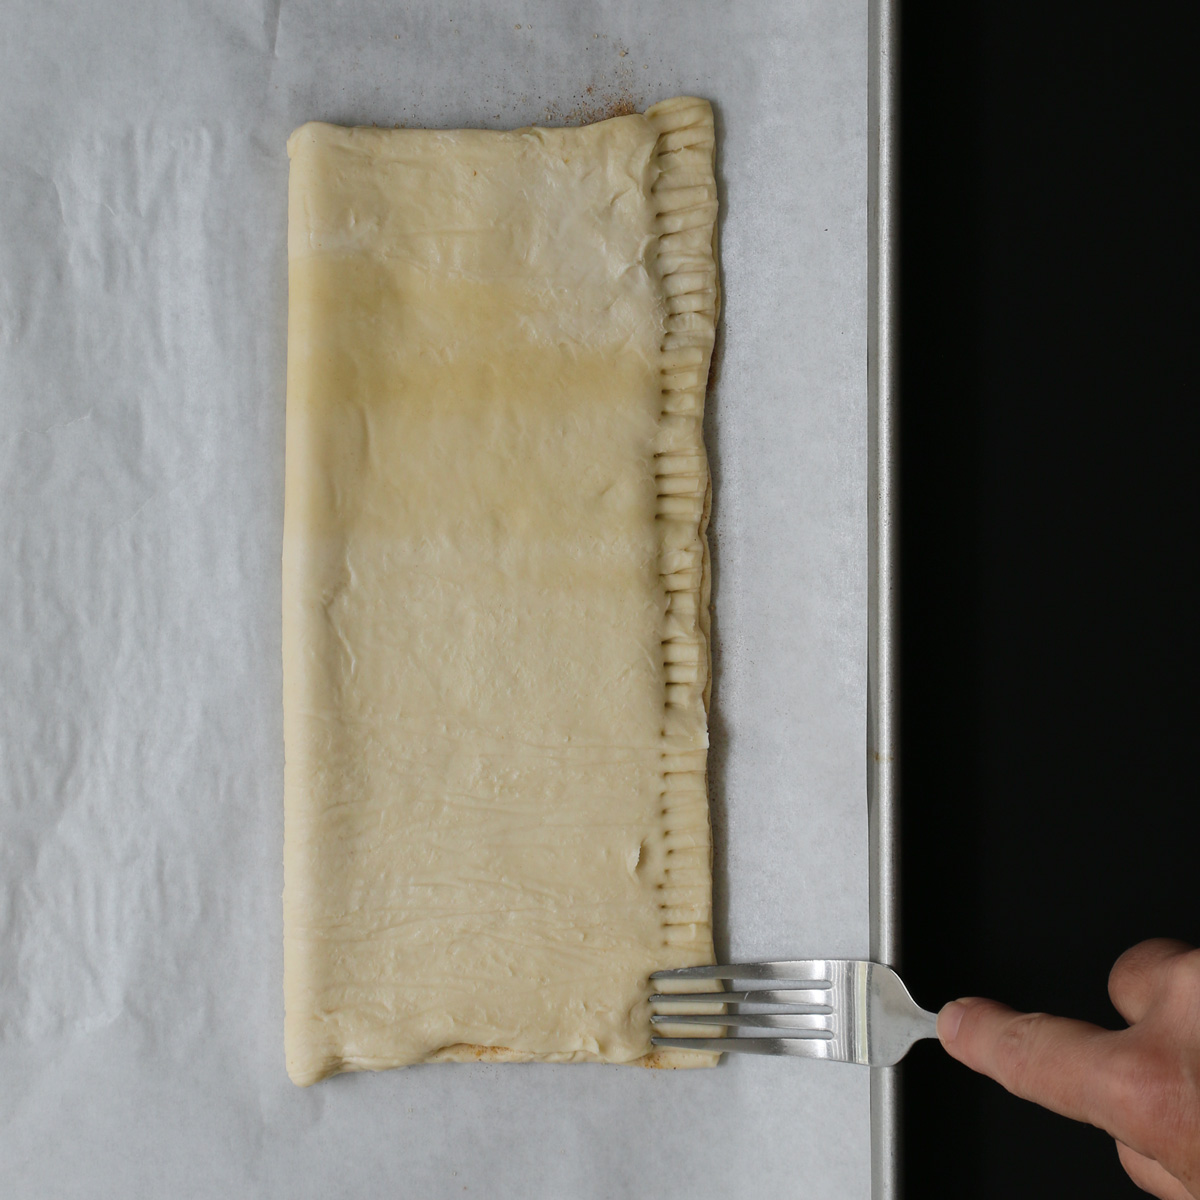 puff pastry folded in half and being crimped on long edge with fork.